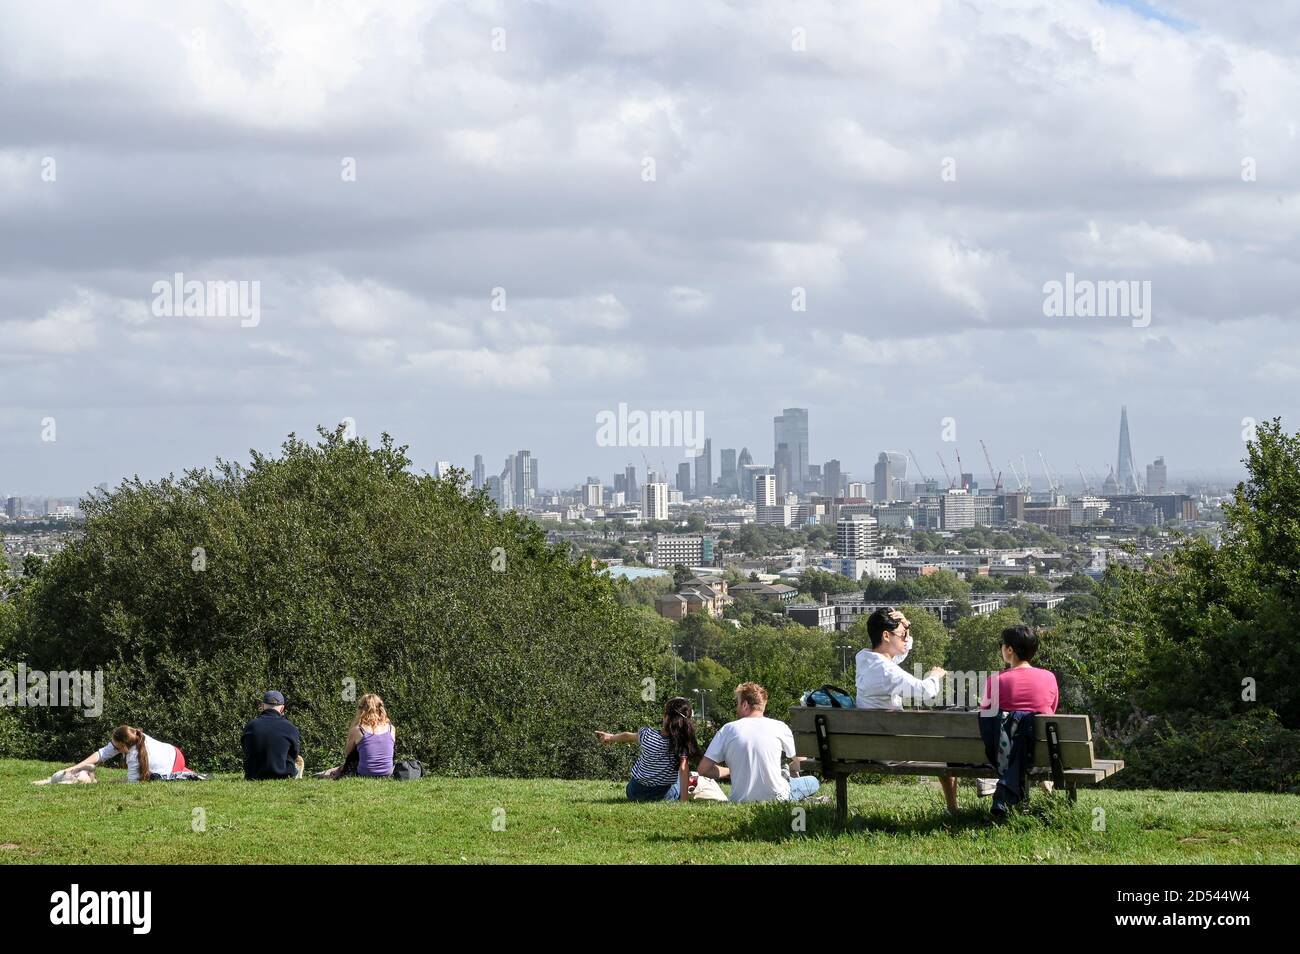 People chatting in small groups on Parliament Hill, London UK, with a view of London city sky line. Stock Photo